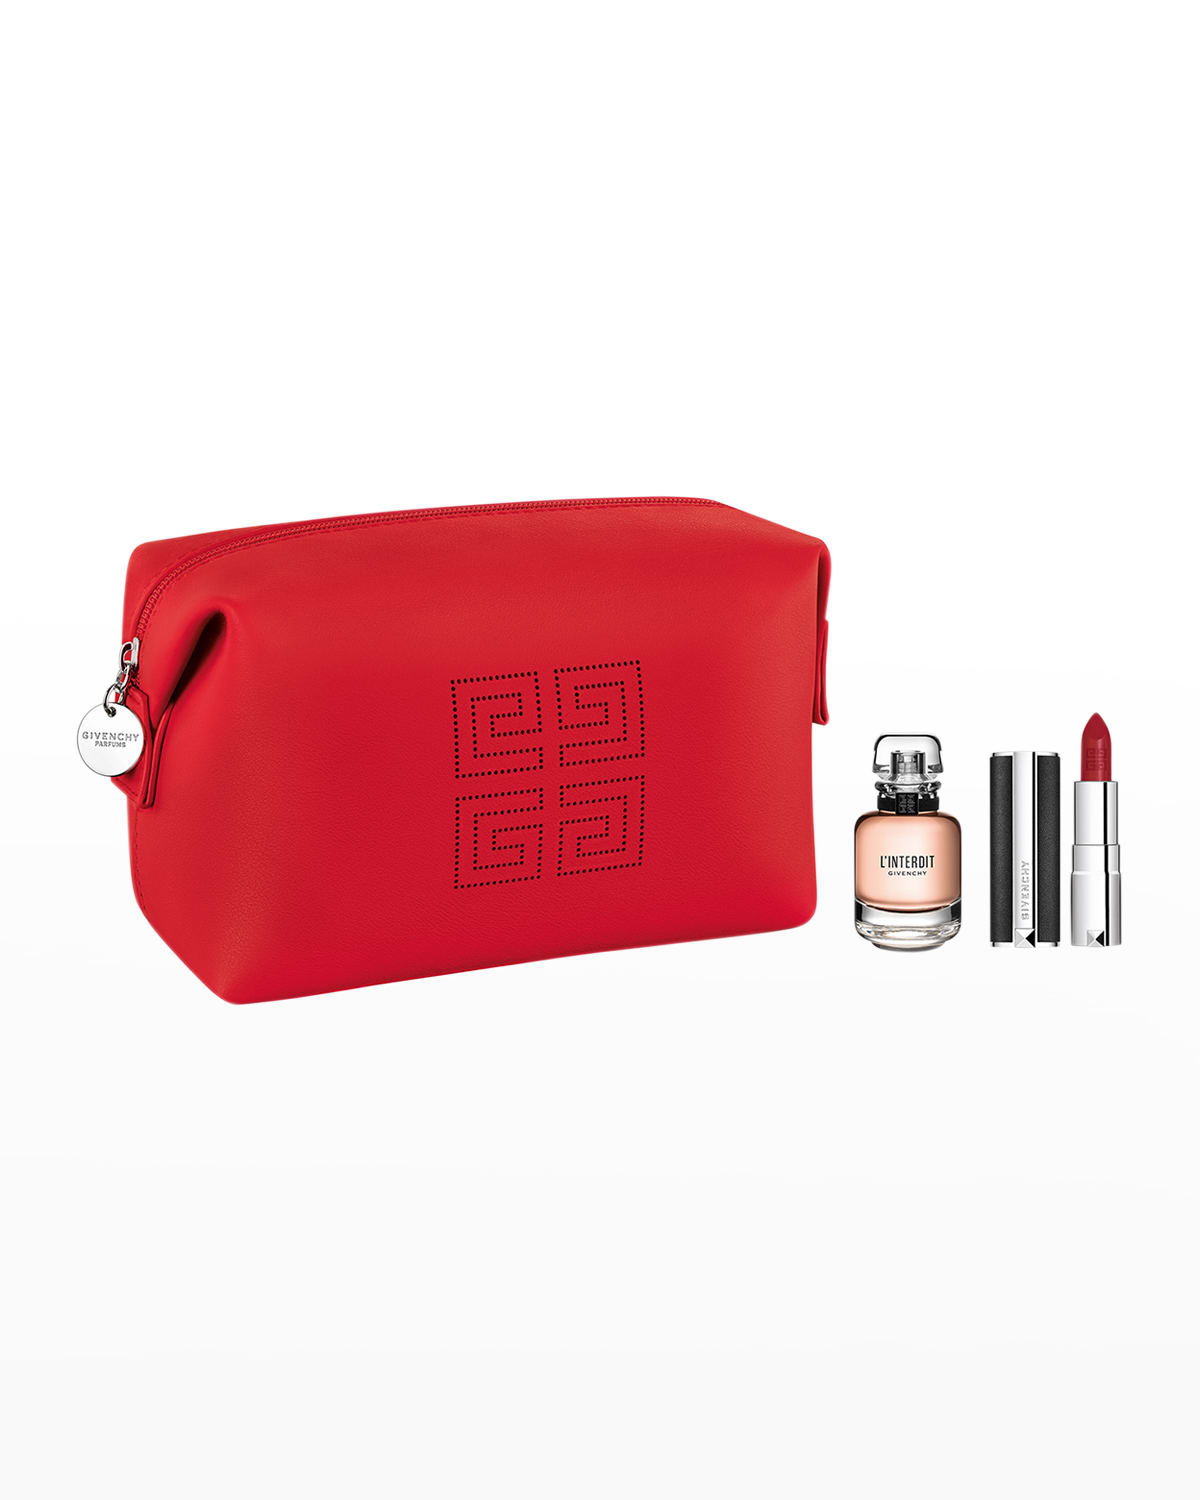 L'Interdit + Le Rouge, Yours with any $200 Givenchy Purchase